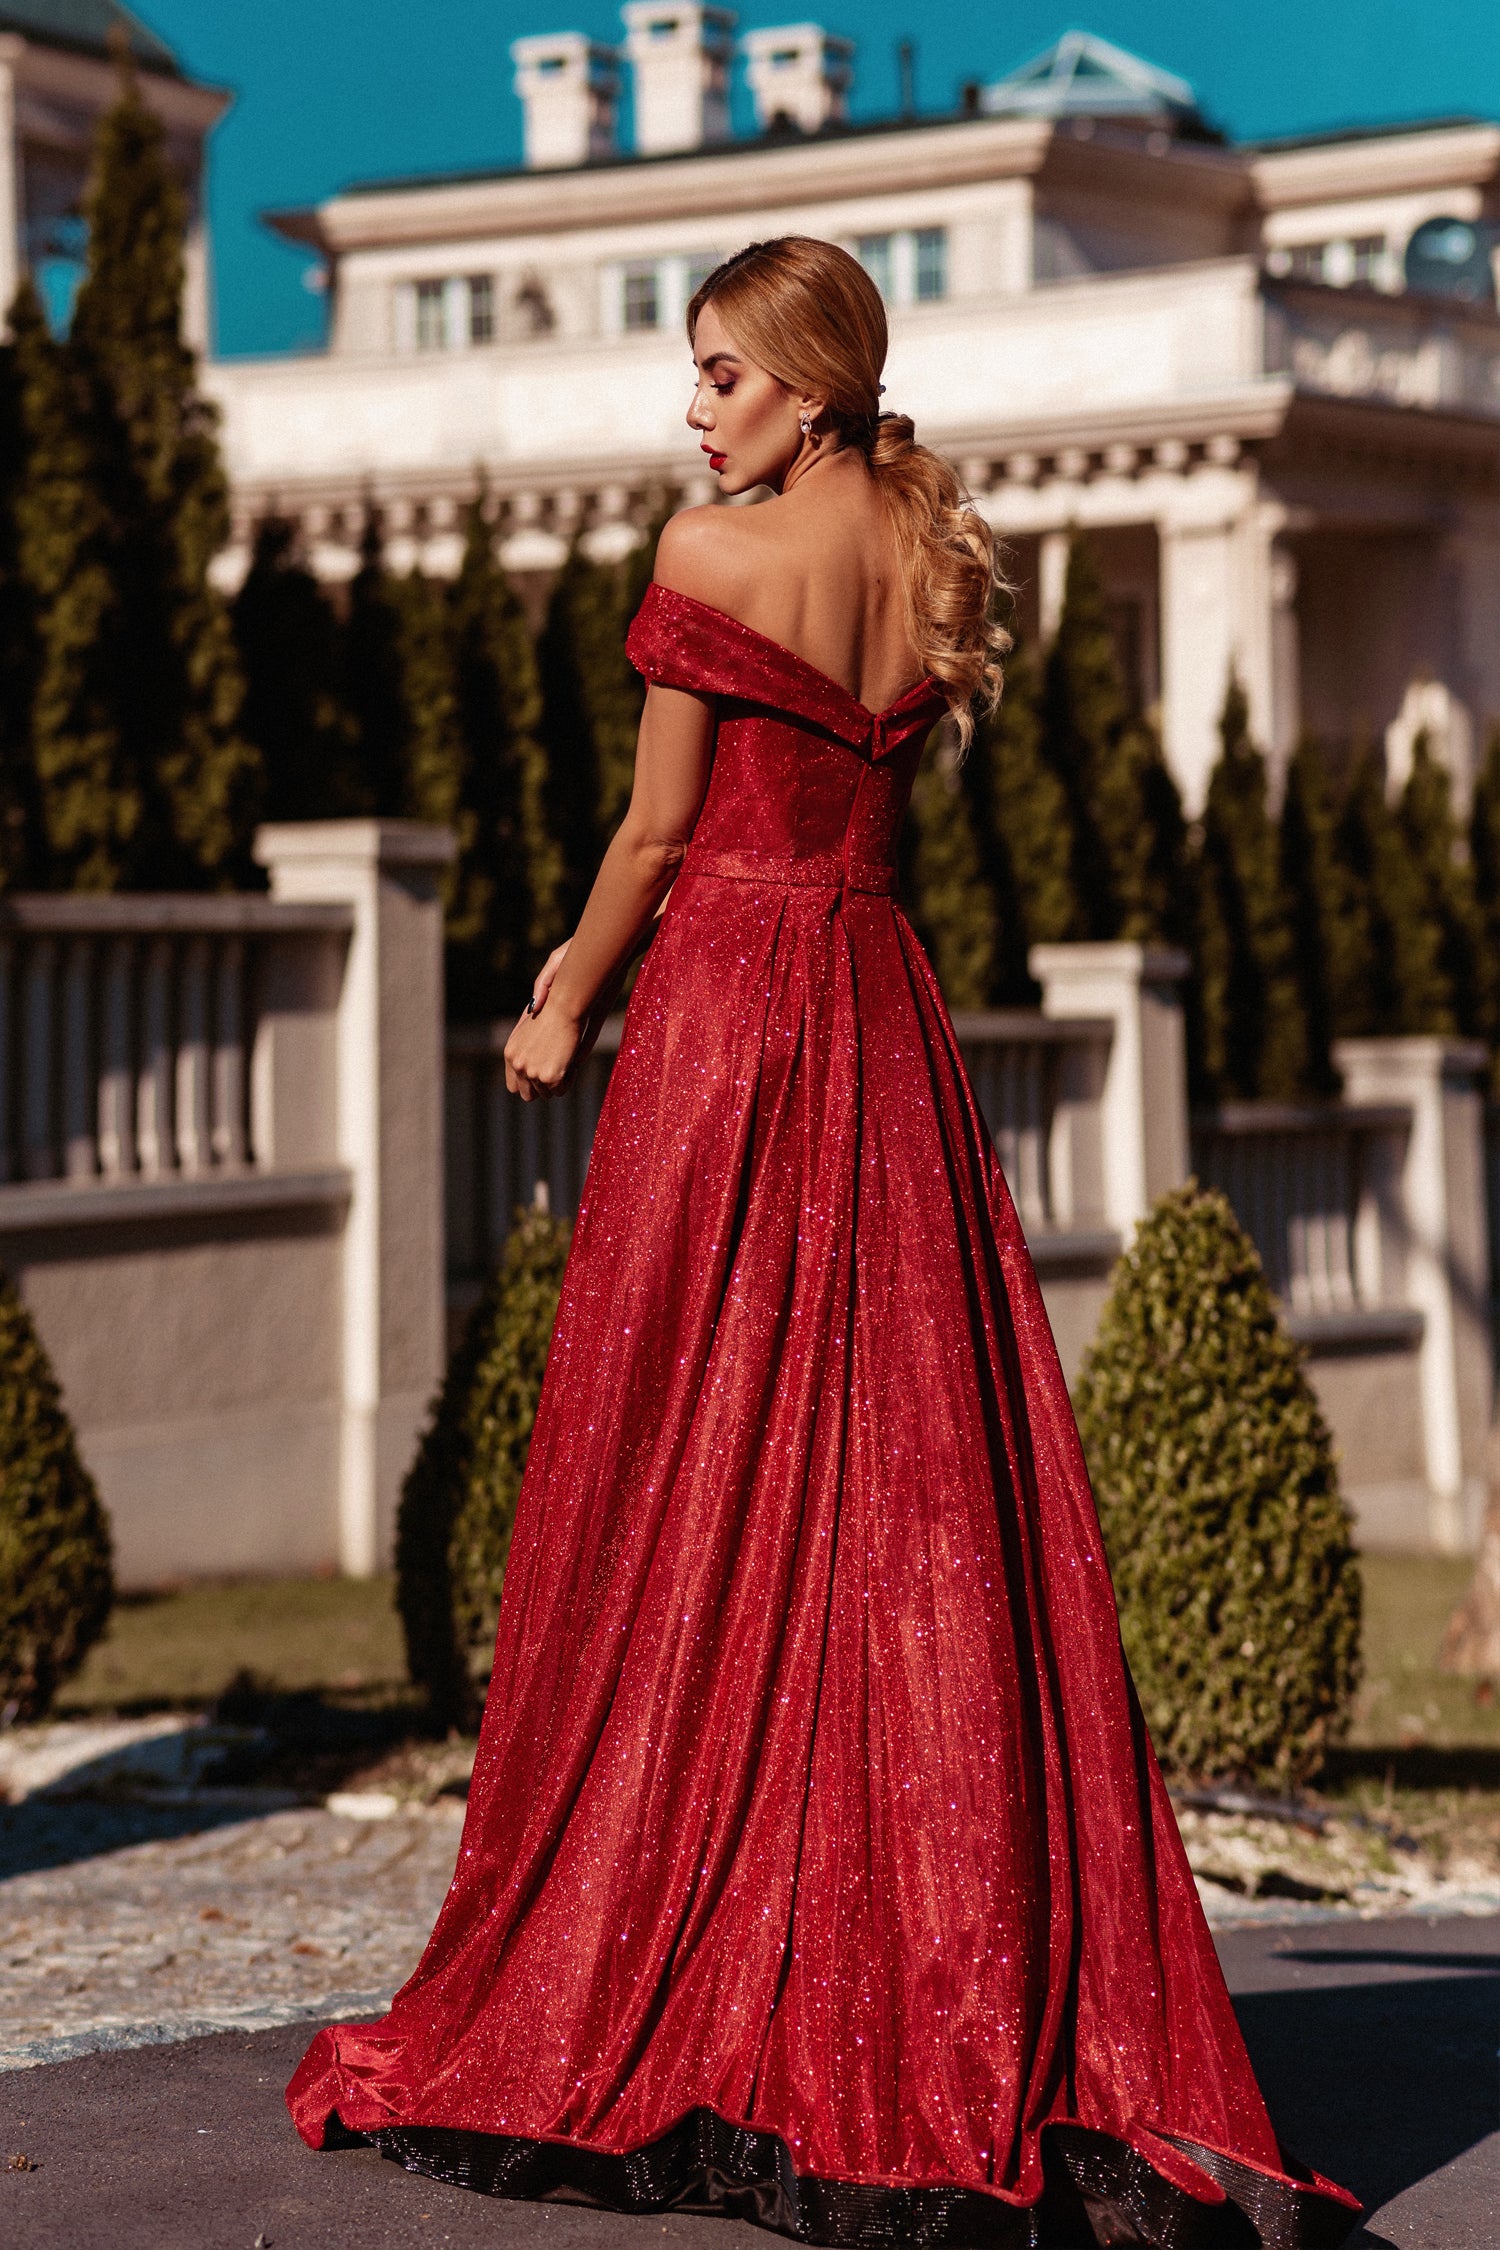 Tina Holly Couture Designer TW028 Red Glitter Formal Dress w Over Skirt